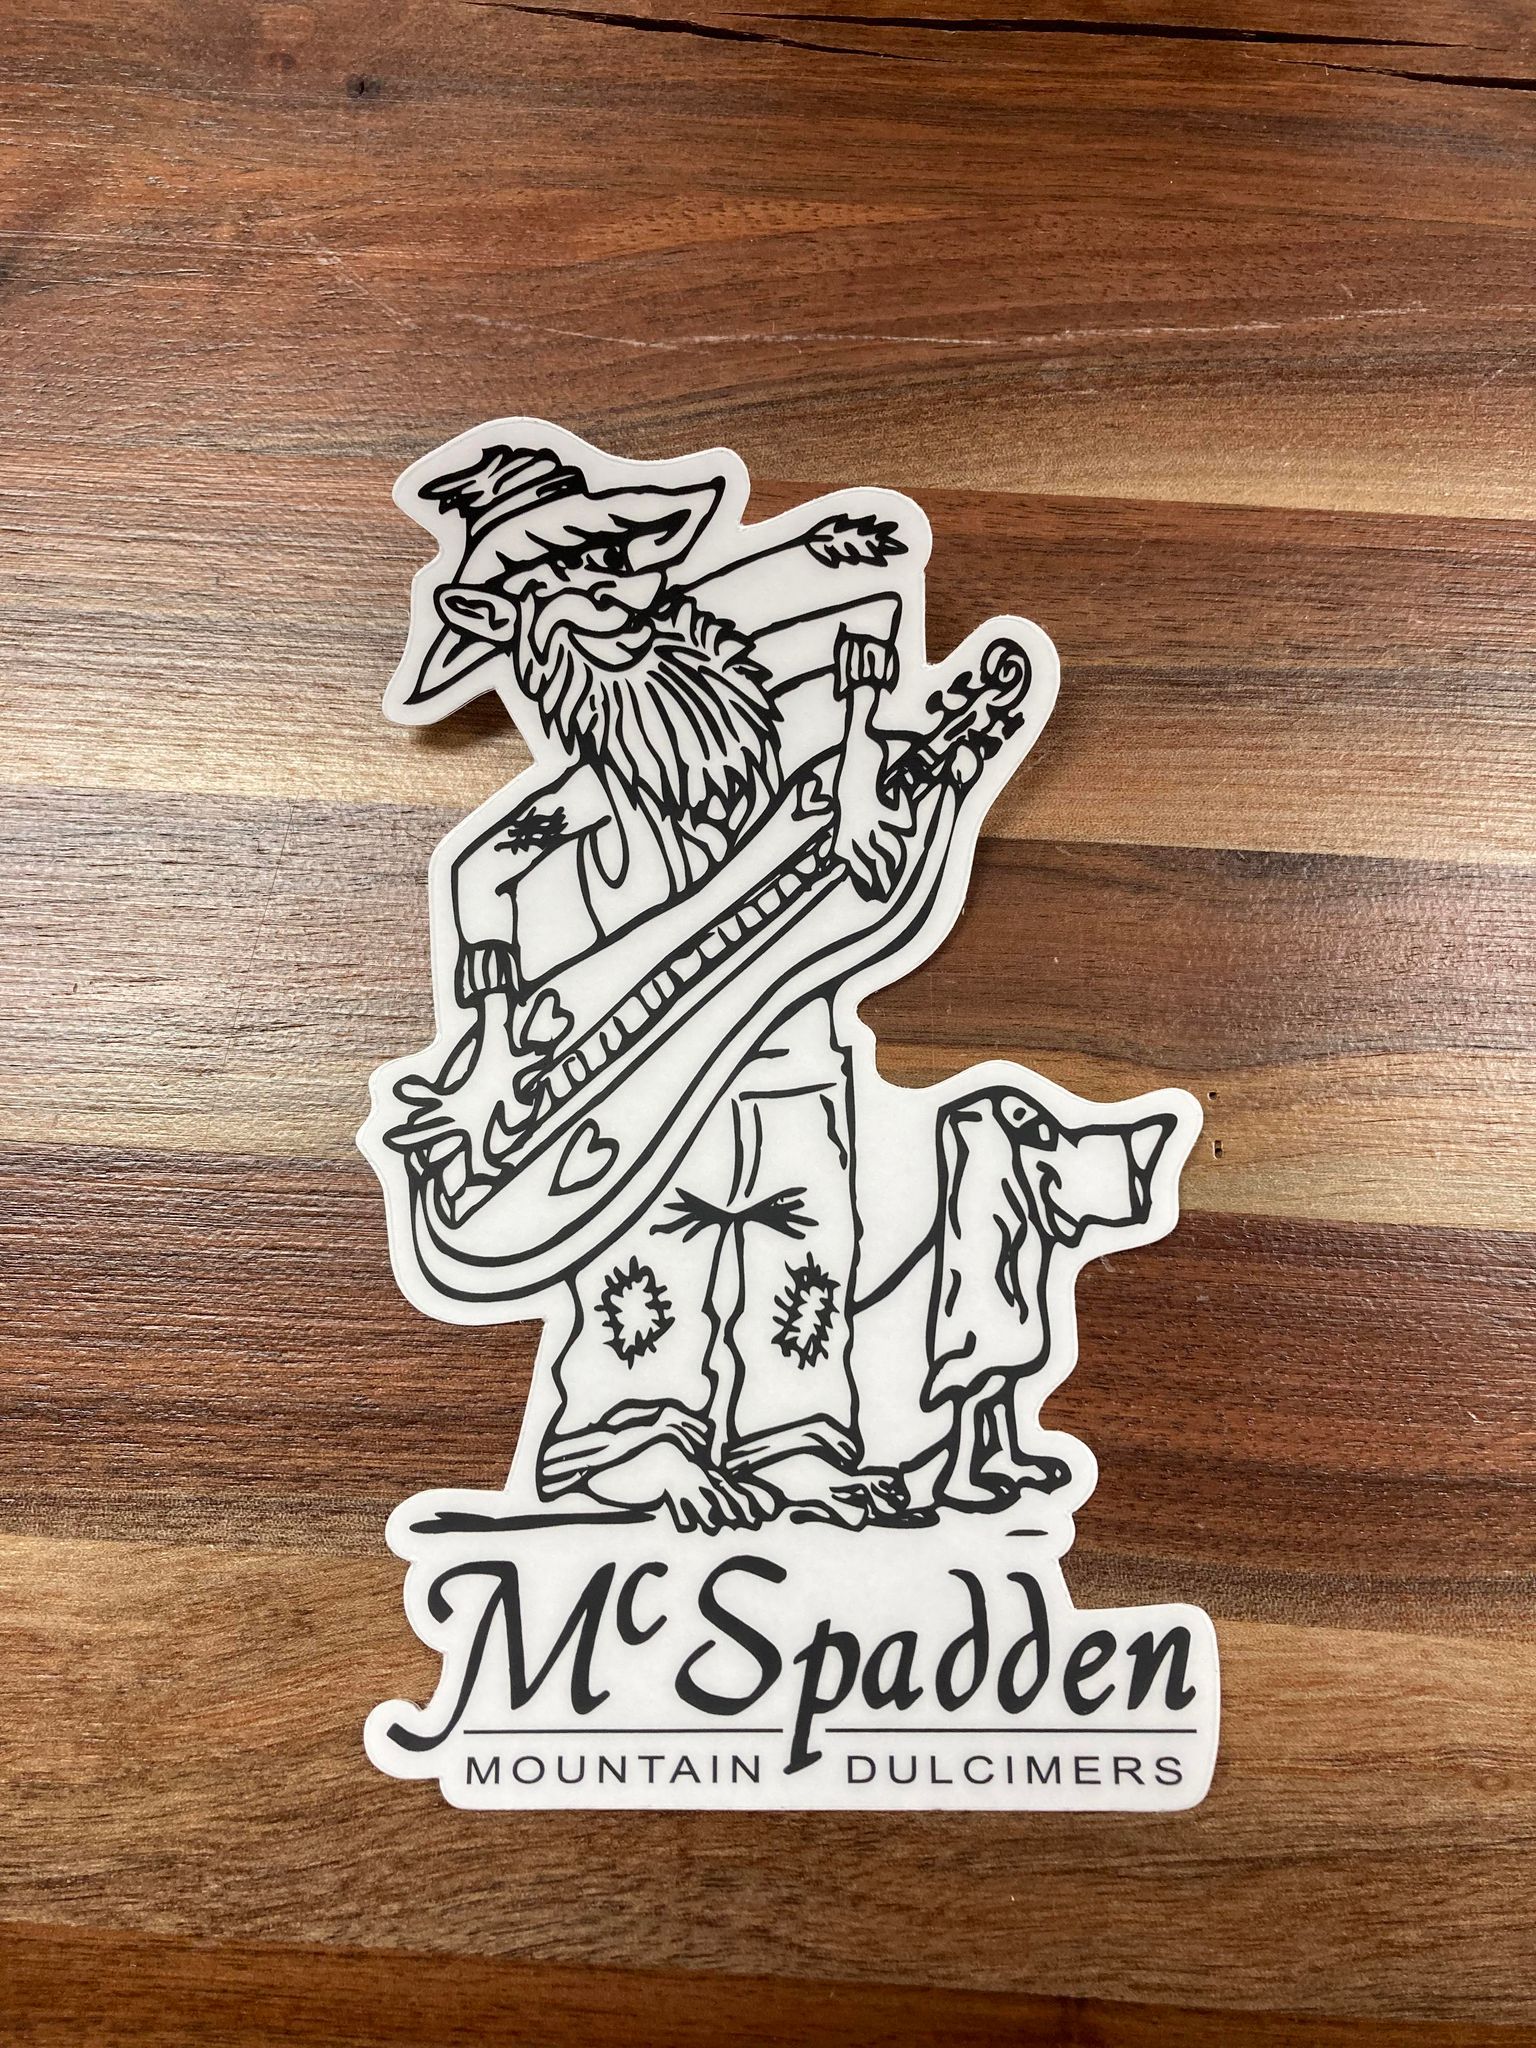 A McSpadden Sticker featuring an illustrated character playing a stringed instrument with a dog beside it, labeled "mcspadden mountain dulcimers," perfect for decorating laptops, on a wooden surface.